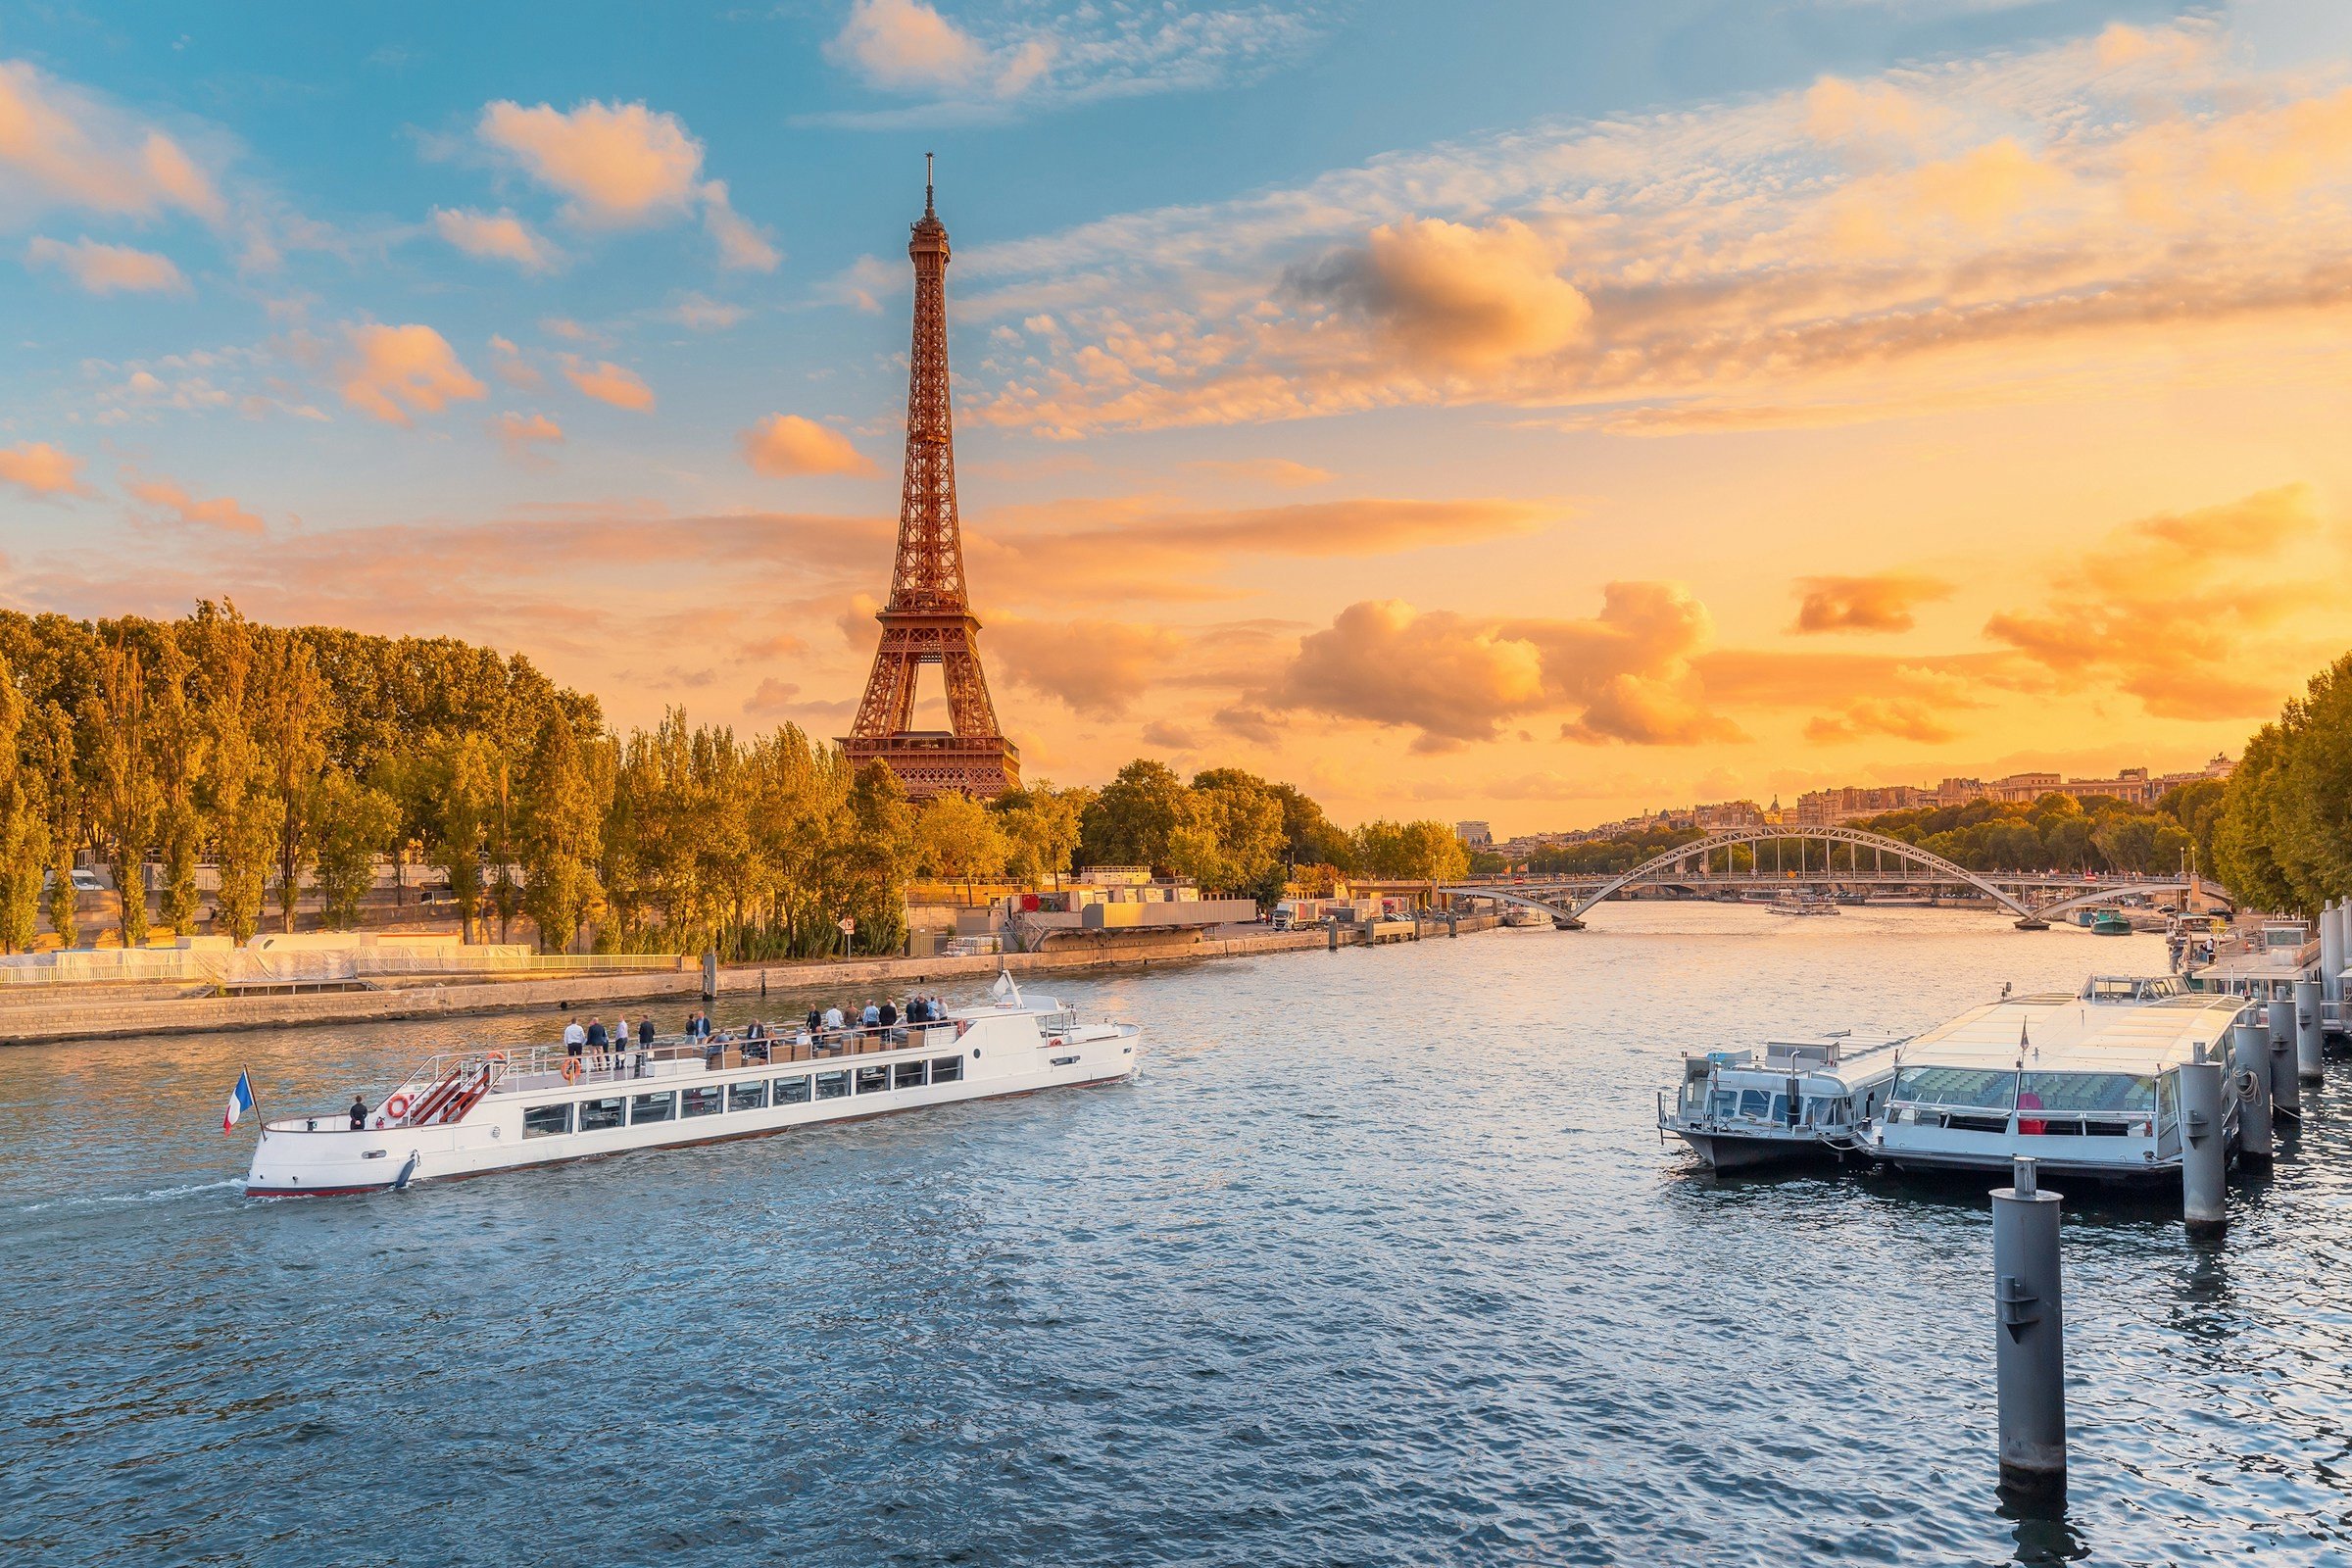 Views of the Seine River and Eiffel Tower at sunset